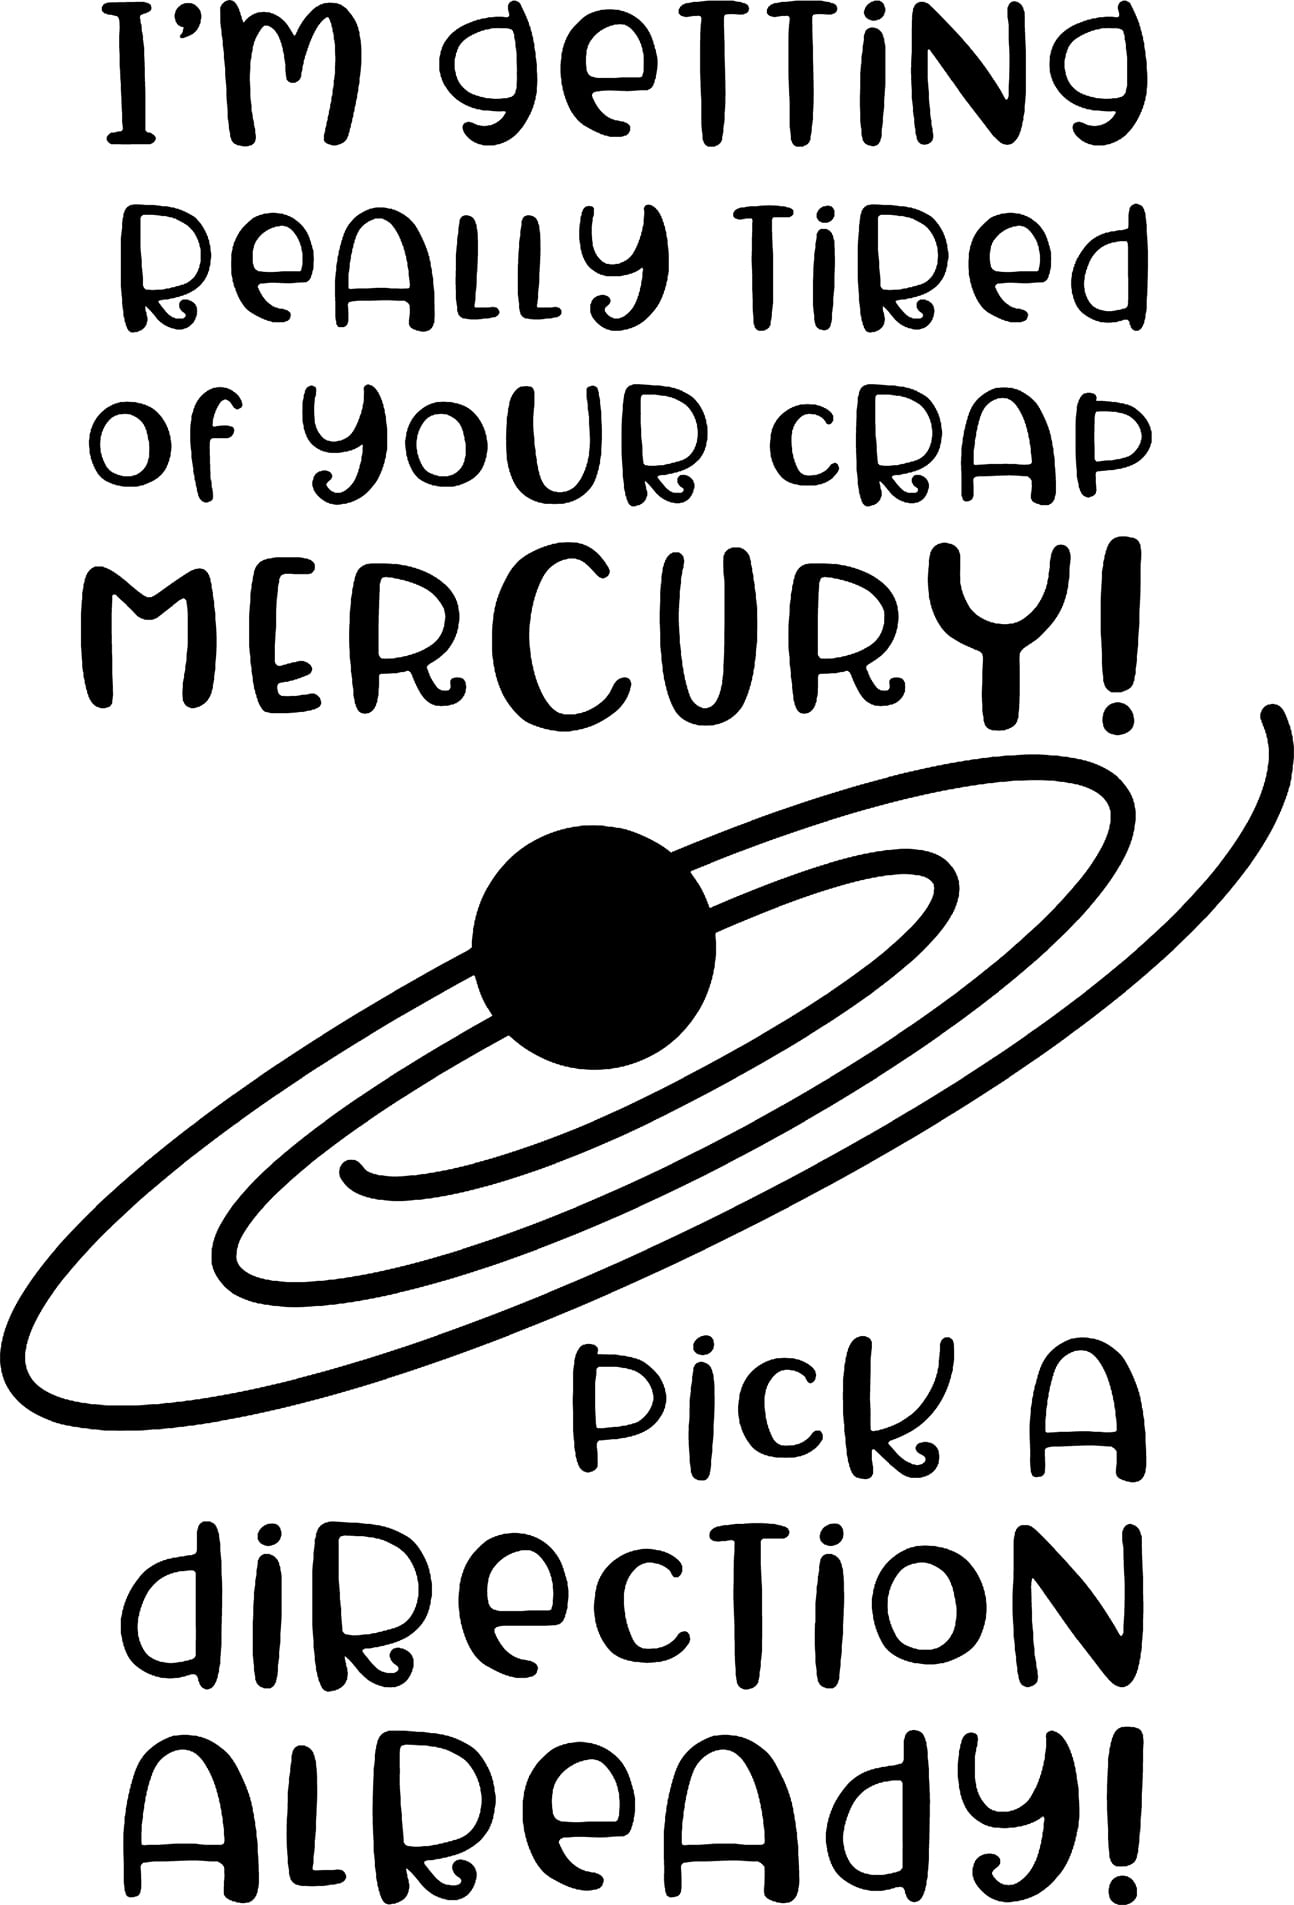 Getting Really Tired Of Your Crap Mercury Pick A Direction Funny Wall  Decals for Walls Peel and Stick wall art murals Black Small 8 Inch -  